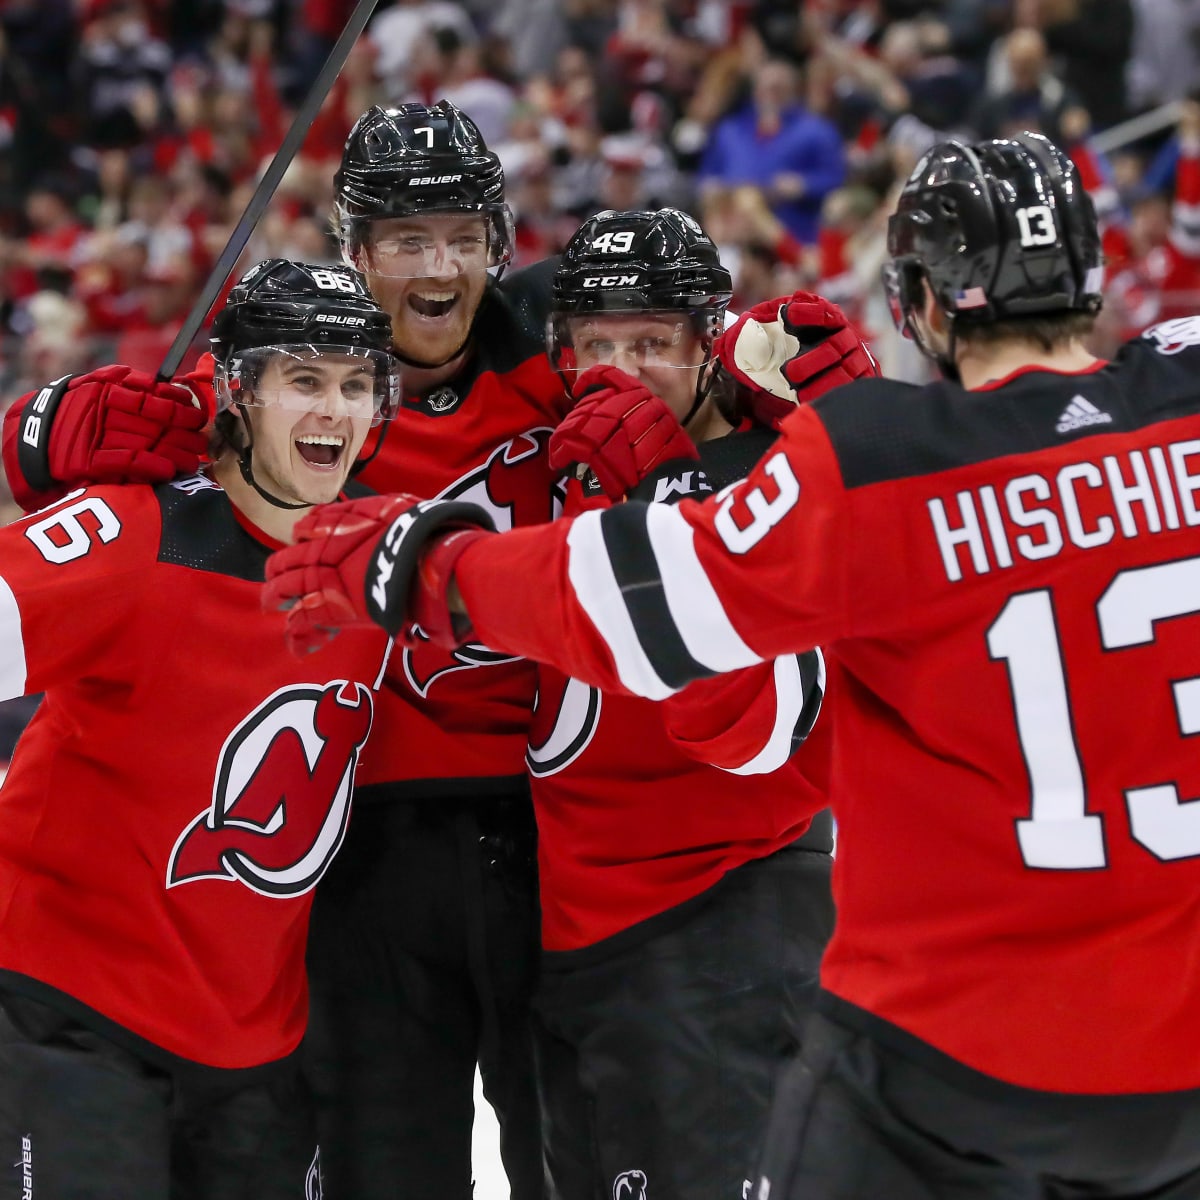 Nico Hischier and Jack Hughes Go from Good to Great - The Hockey News